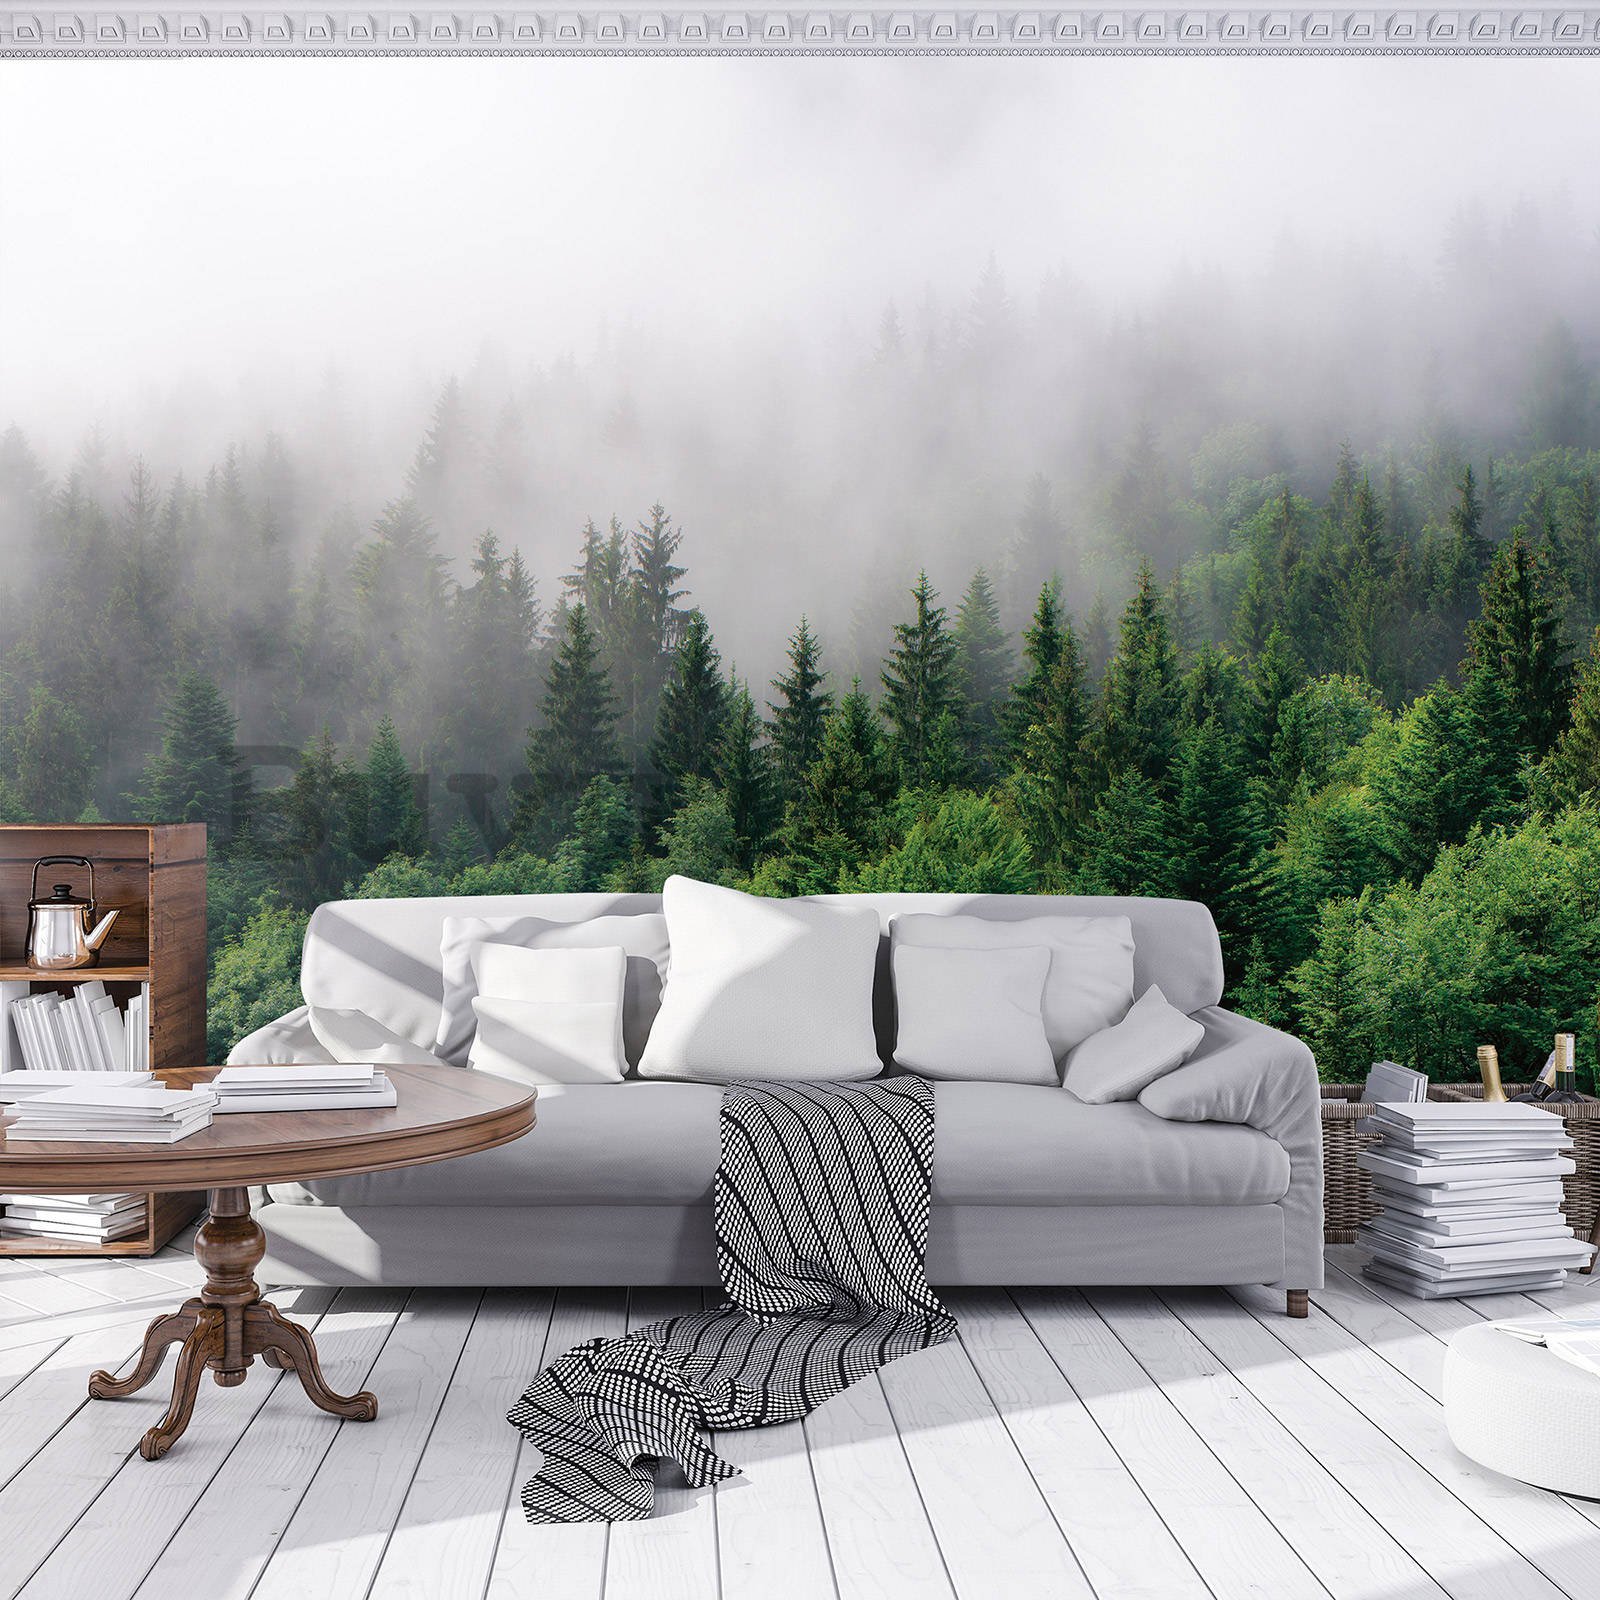 Wall mural vlies: Fog over the forest (2) - 416x254 cm